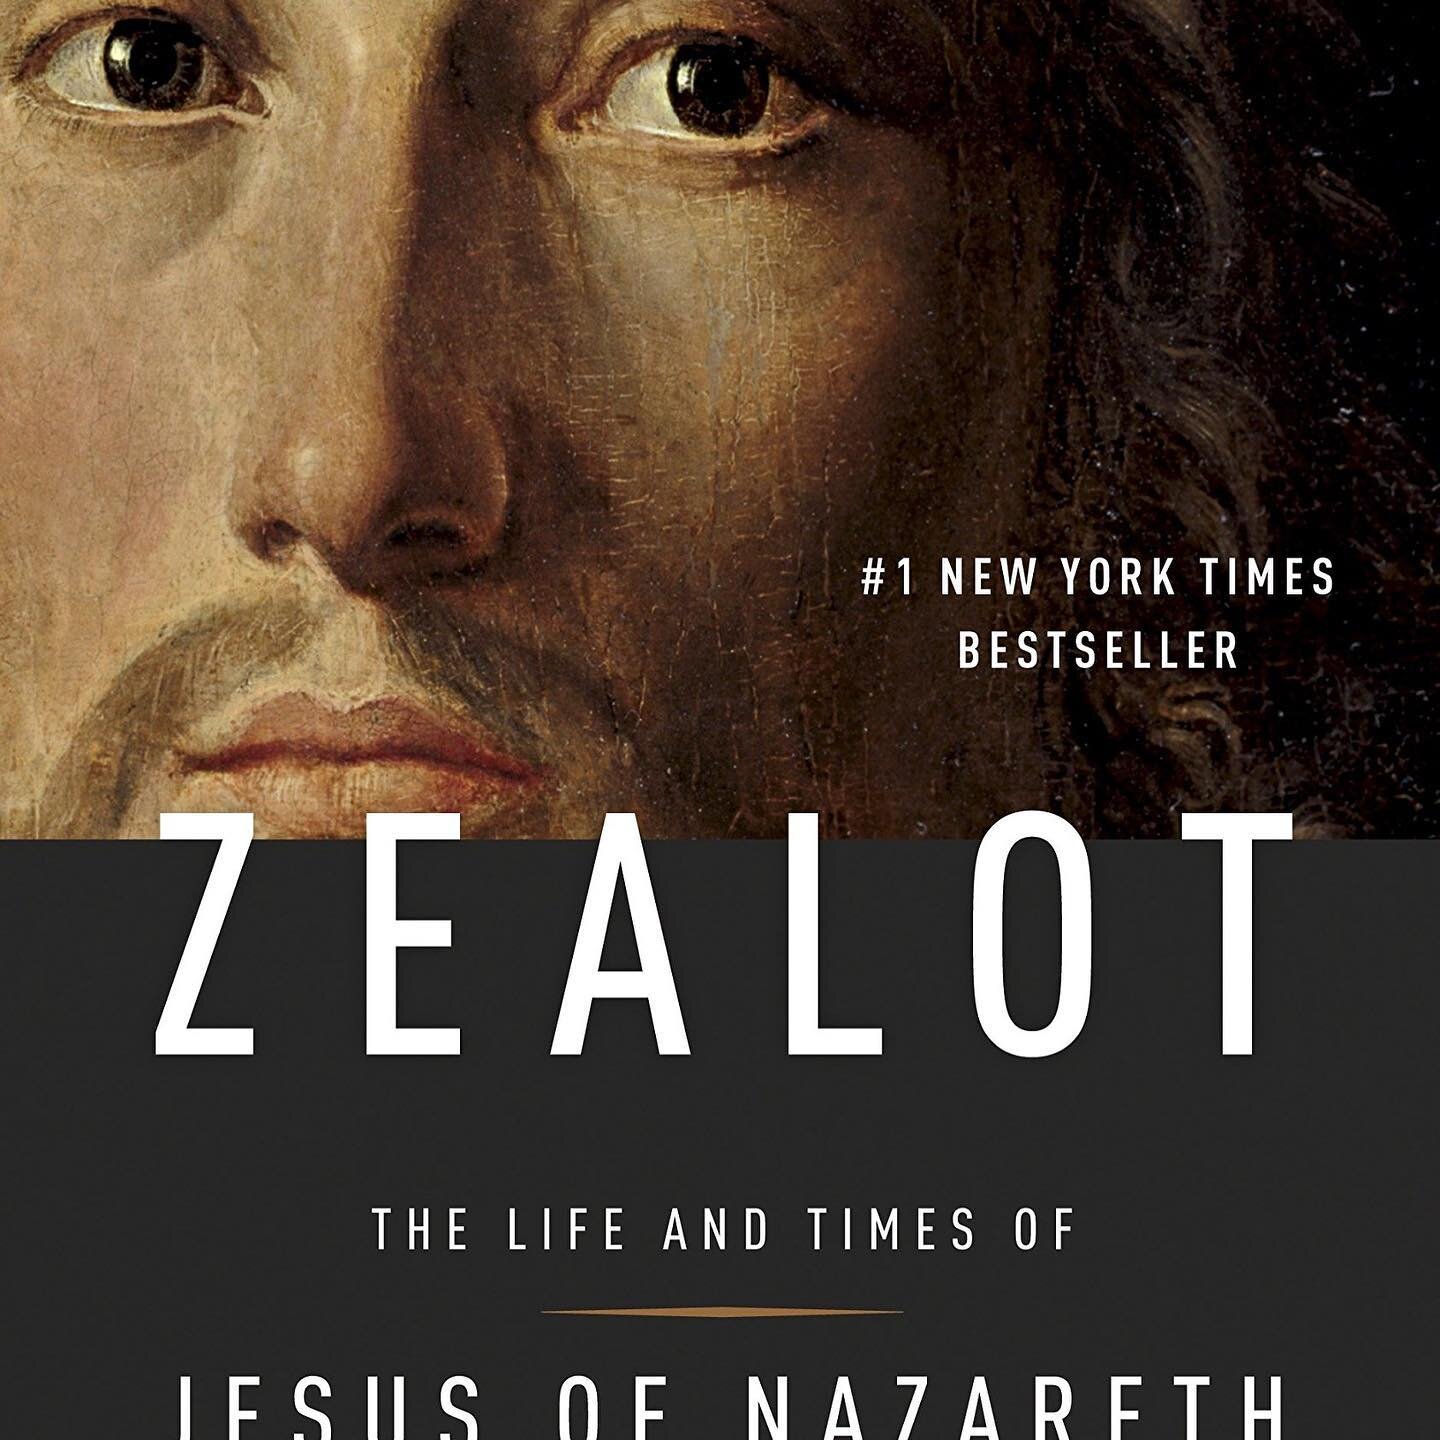 🗓 2/24/2019
📖 Zealot by Reza Aslan 
This is a history book about Jesus the man, not Jesus the Christ. It is exceedingly difficult to separate the two, but he tries.
Captivating and informative, but perhaps not the game changer Aslan wanted it to be